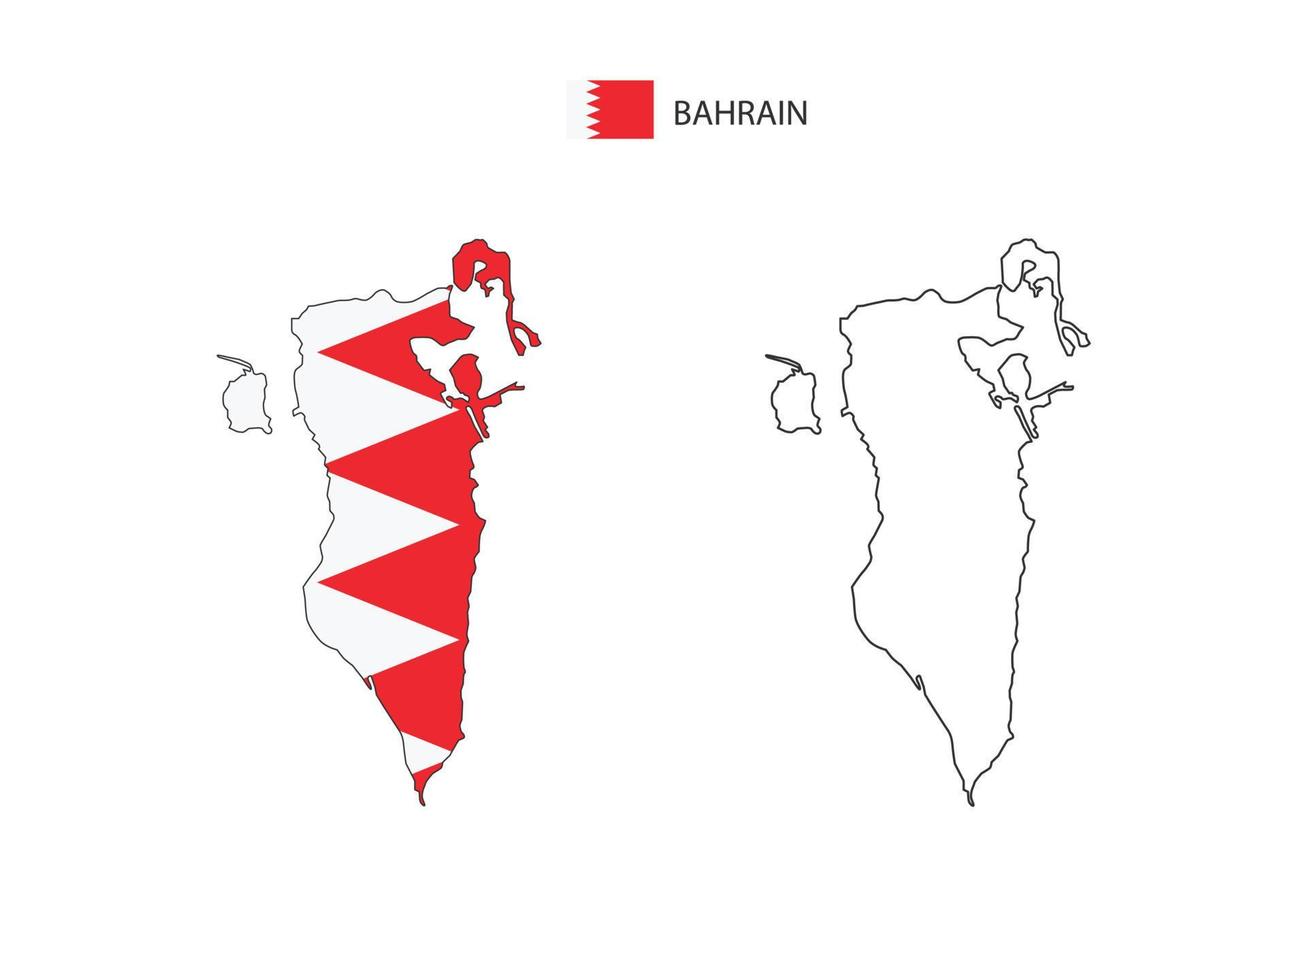 Bahrain map city vector divided by outline simplicity style. Have 2 versions, black thin line version and color of country flag version. Both map were on the white background.